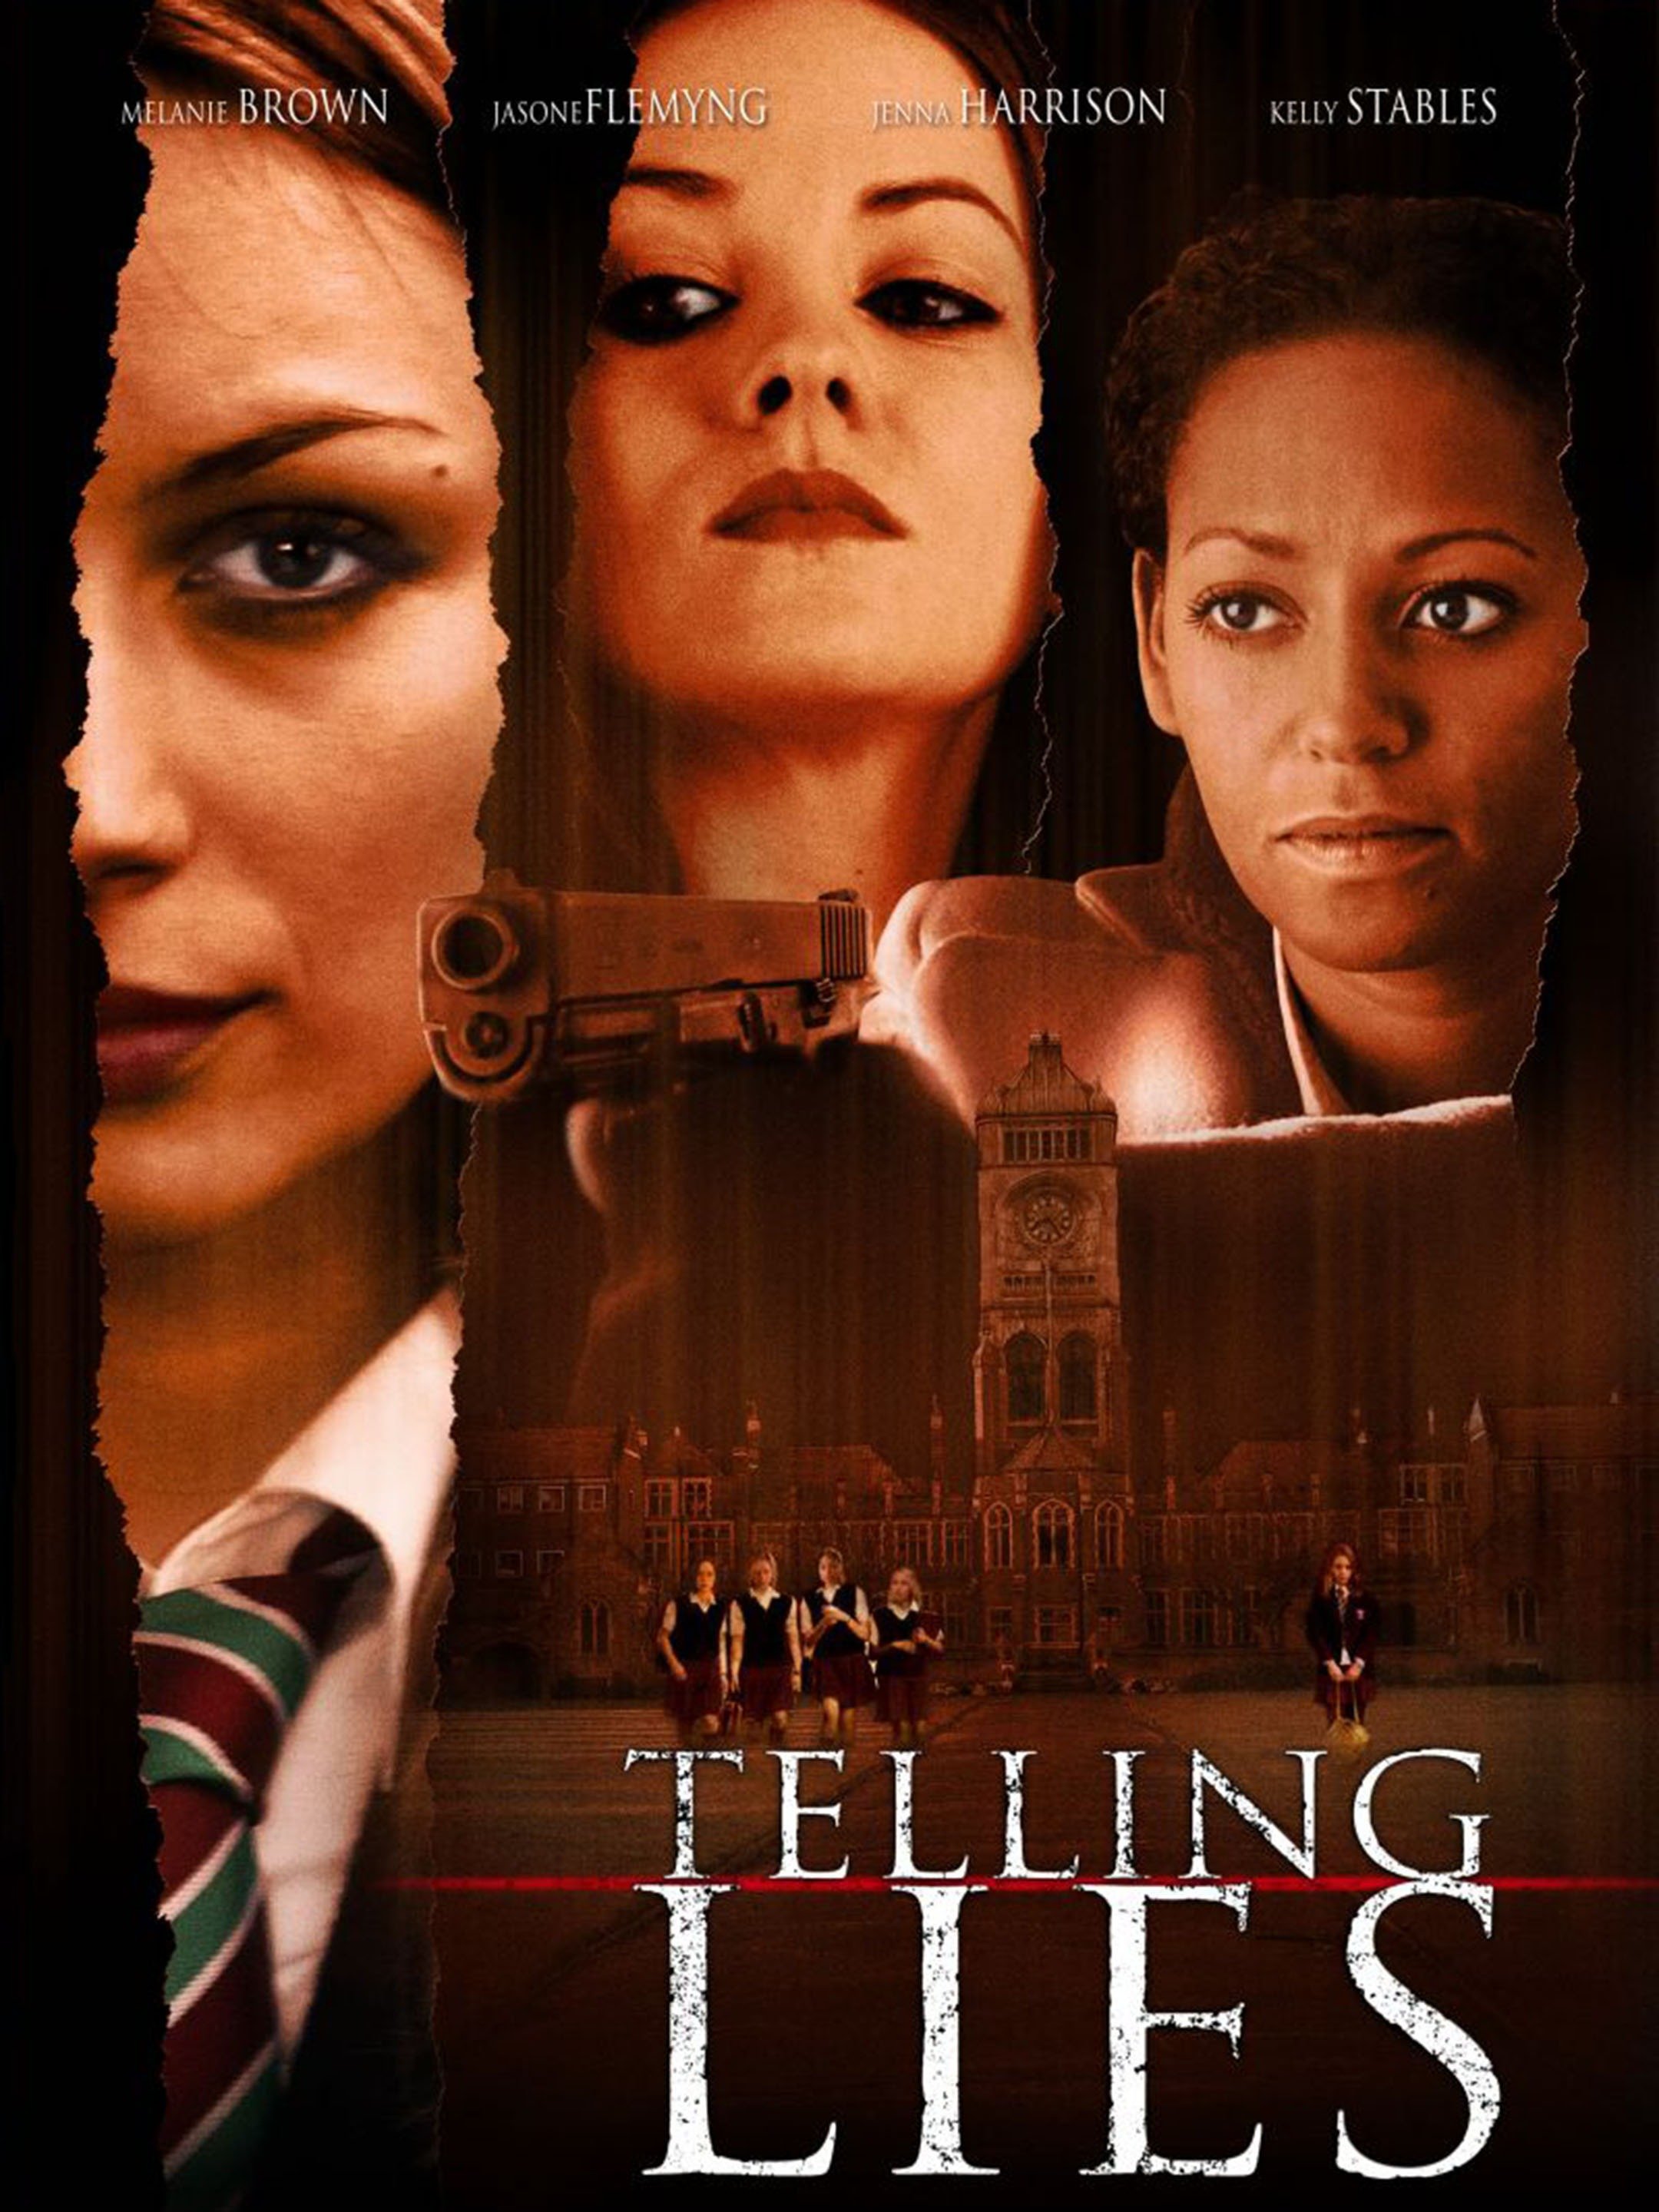 telling lies full story download free